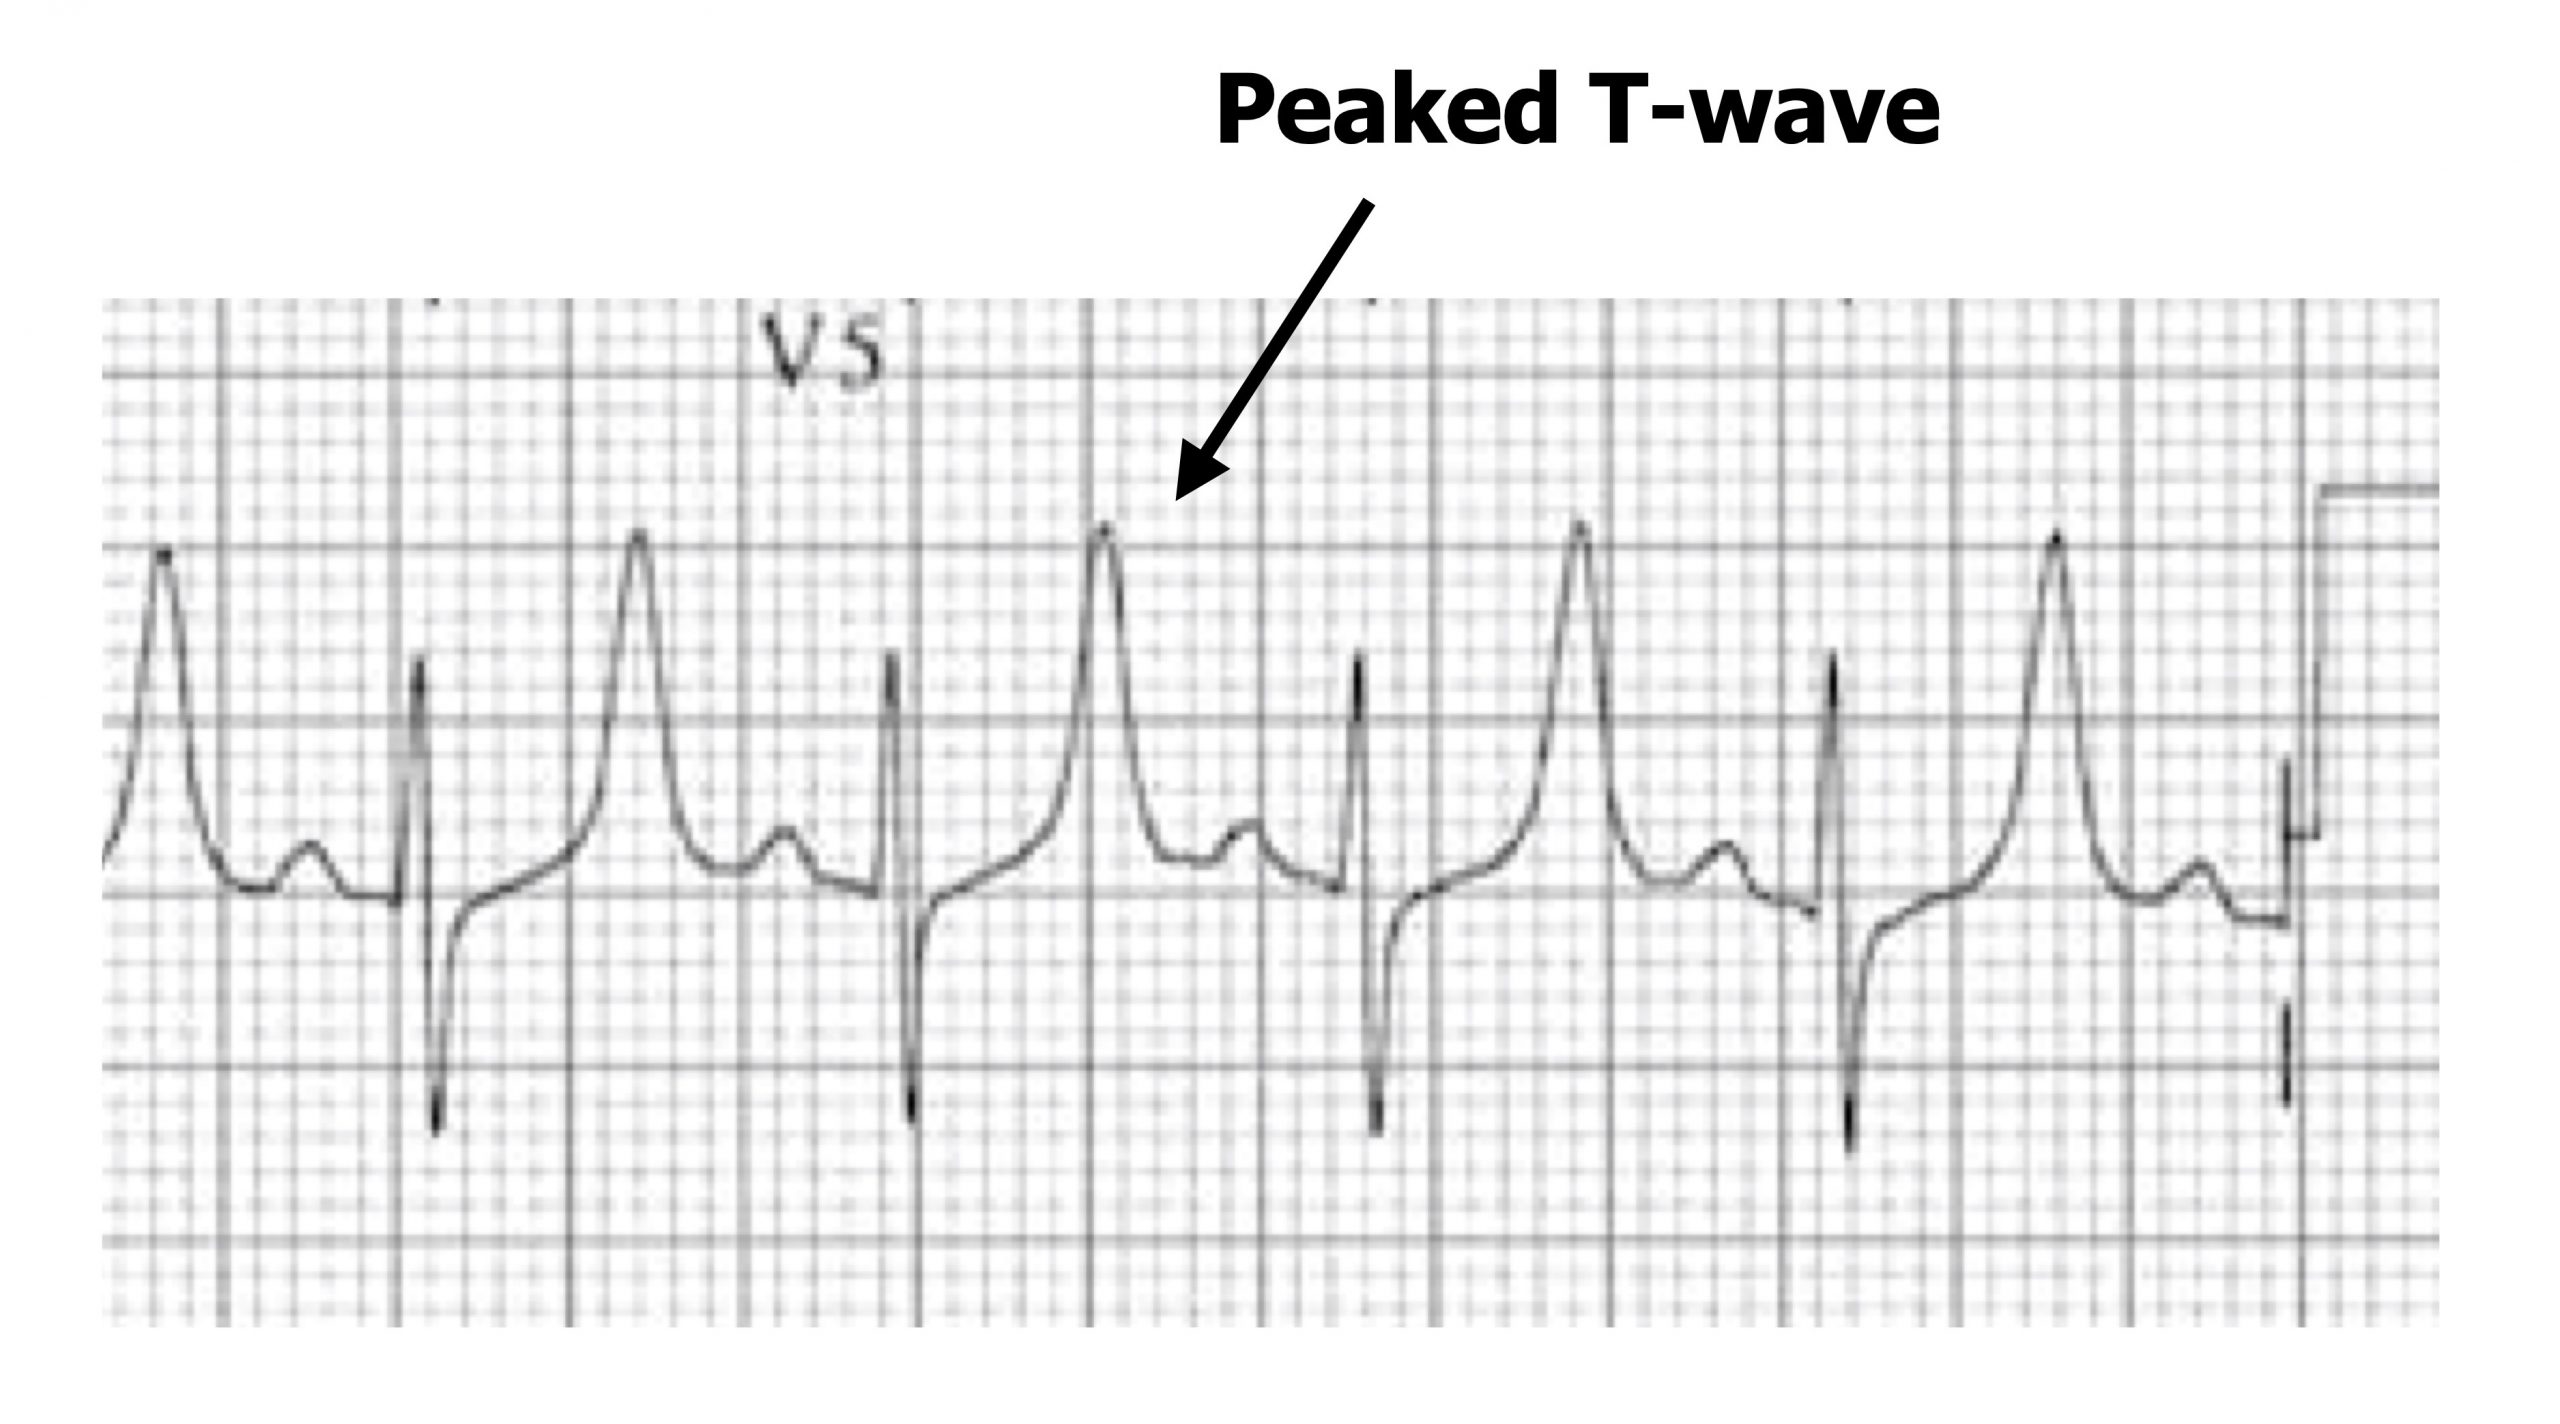 The ECG of mild hyperkalemia shows a relatively normal ECG in lead V5 except for very high T-waves that are peaked and exceed the height of the proceeding R-wave.